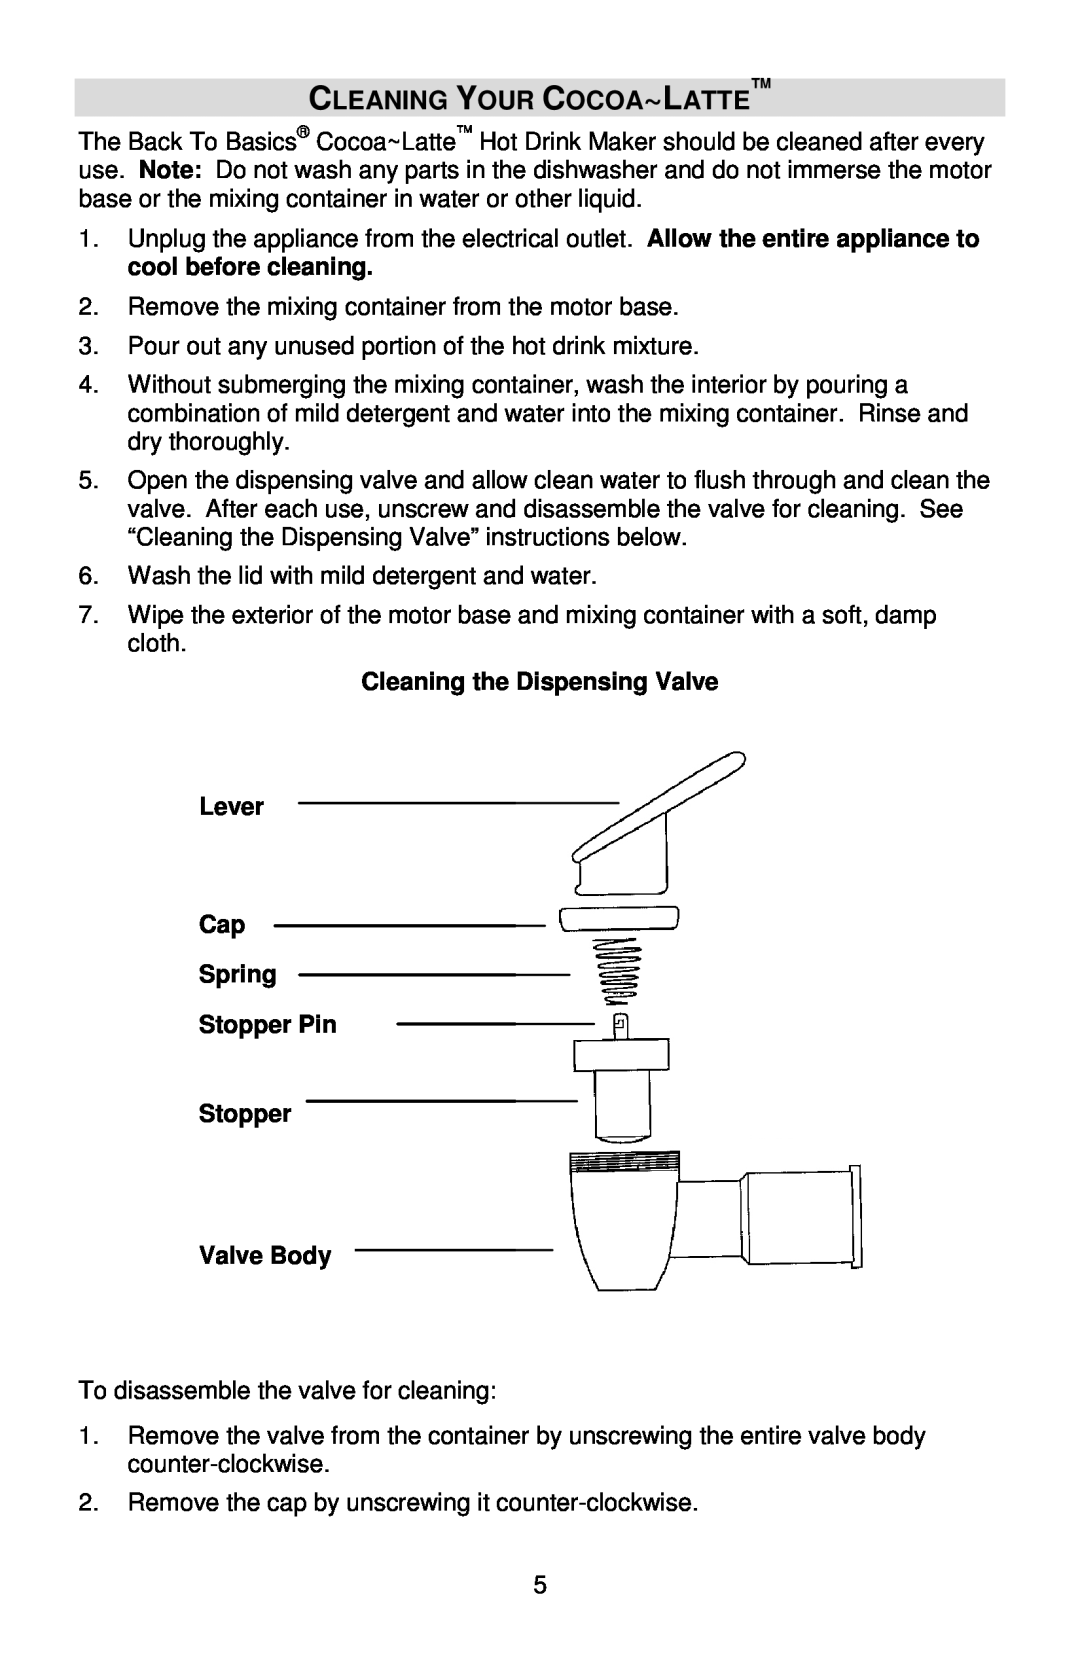 West Bend Back to Basics instruction manual Cleaning Your Cocoa~Latte, Cleaning the Dispensing Valve Lever Cap Spring 